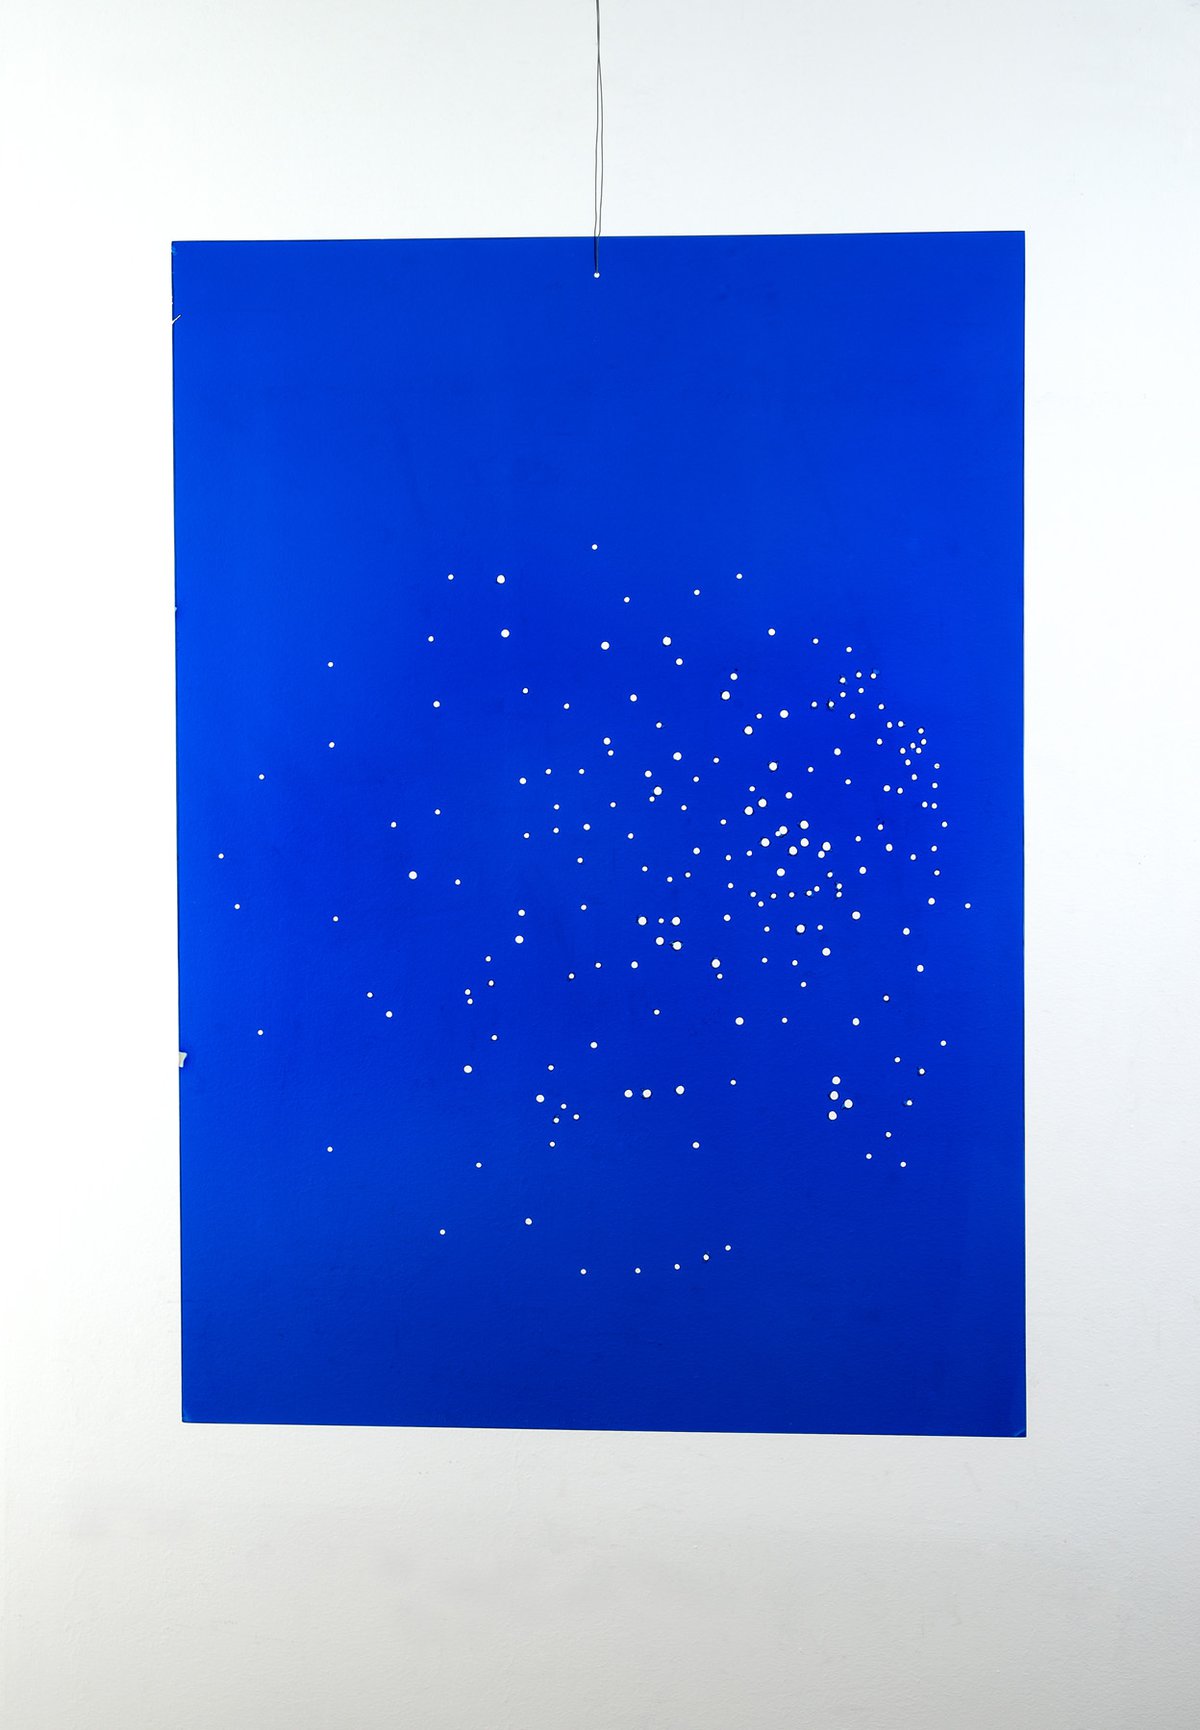 Stano FilkoFrom the series Picture – Space I-X, 1967Perforation, plexiglass100 x 72 x 3 cm